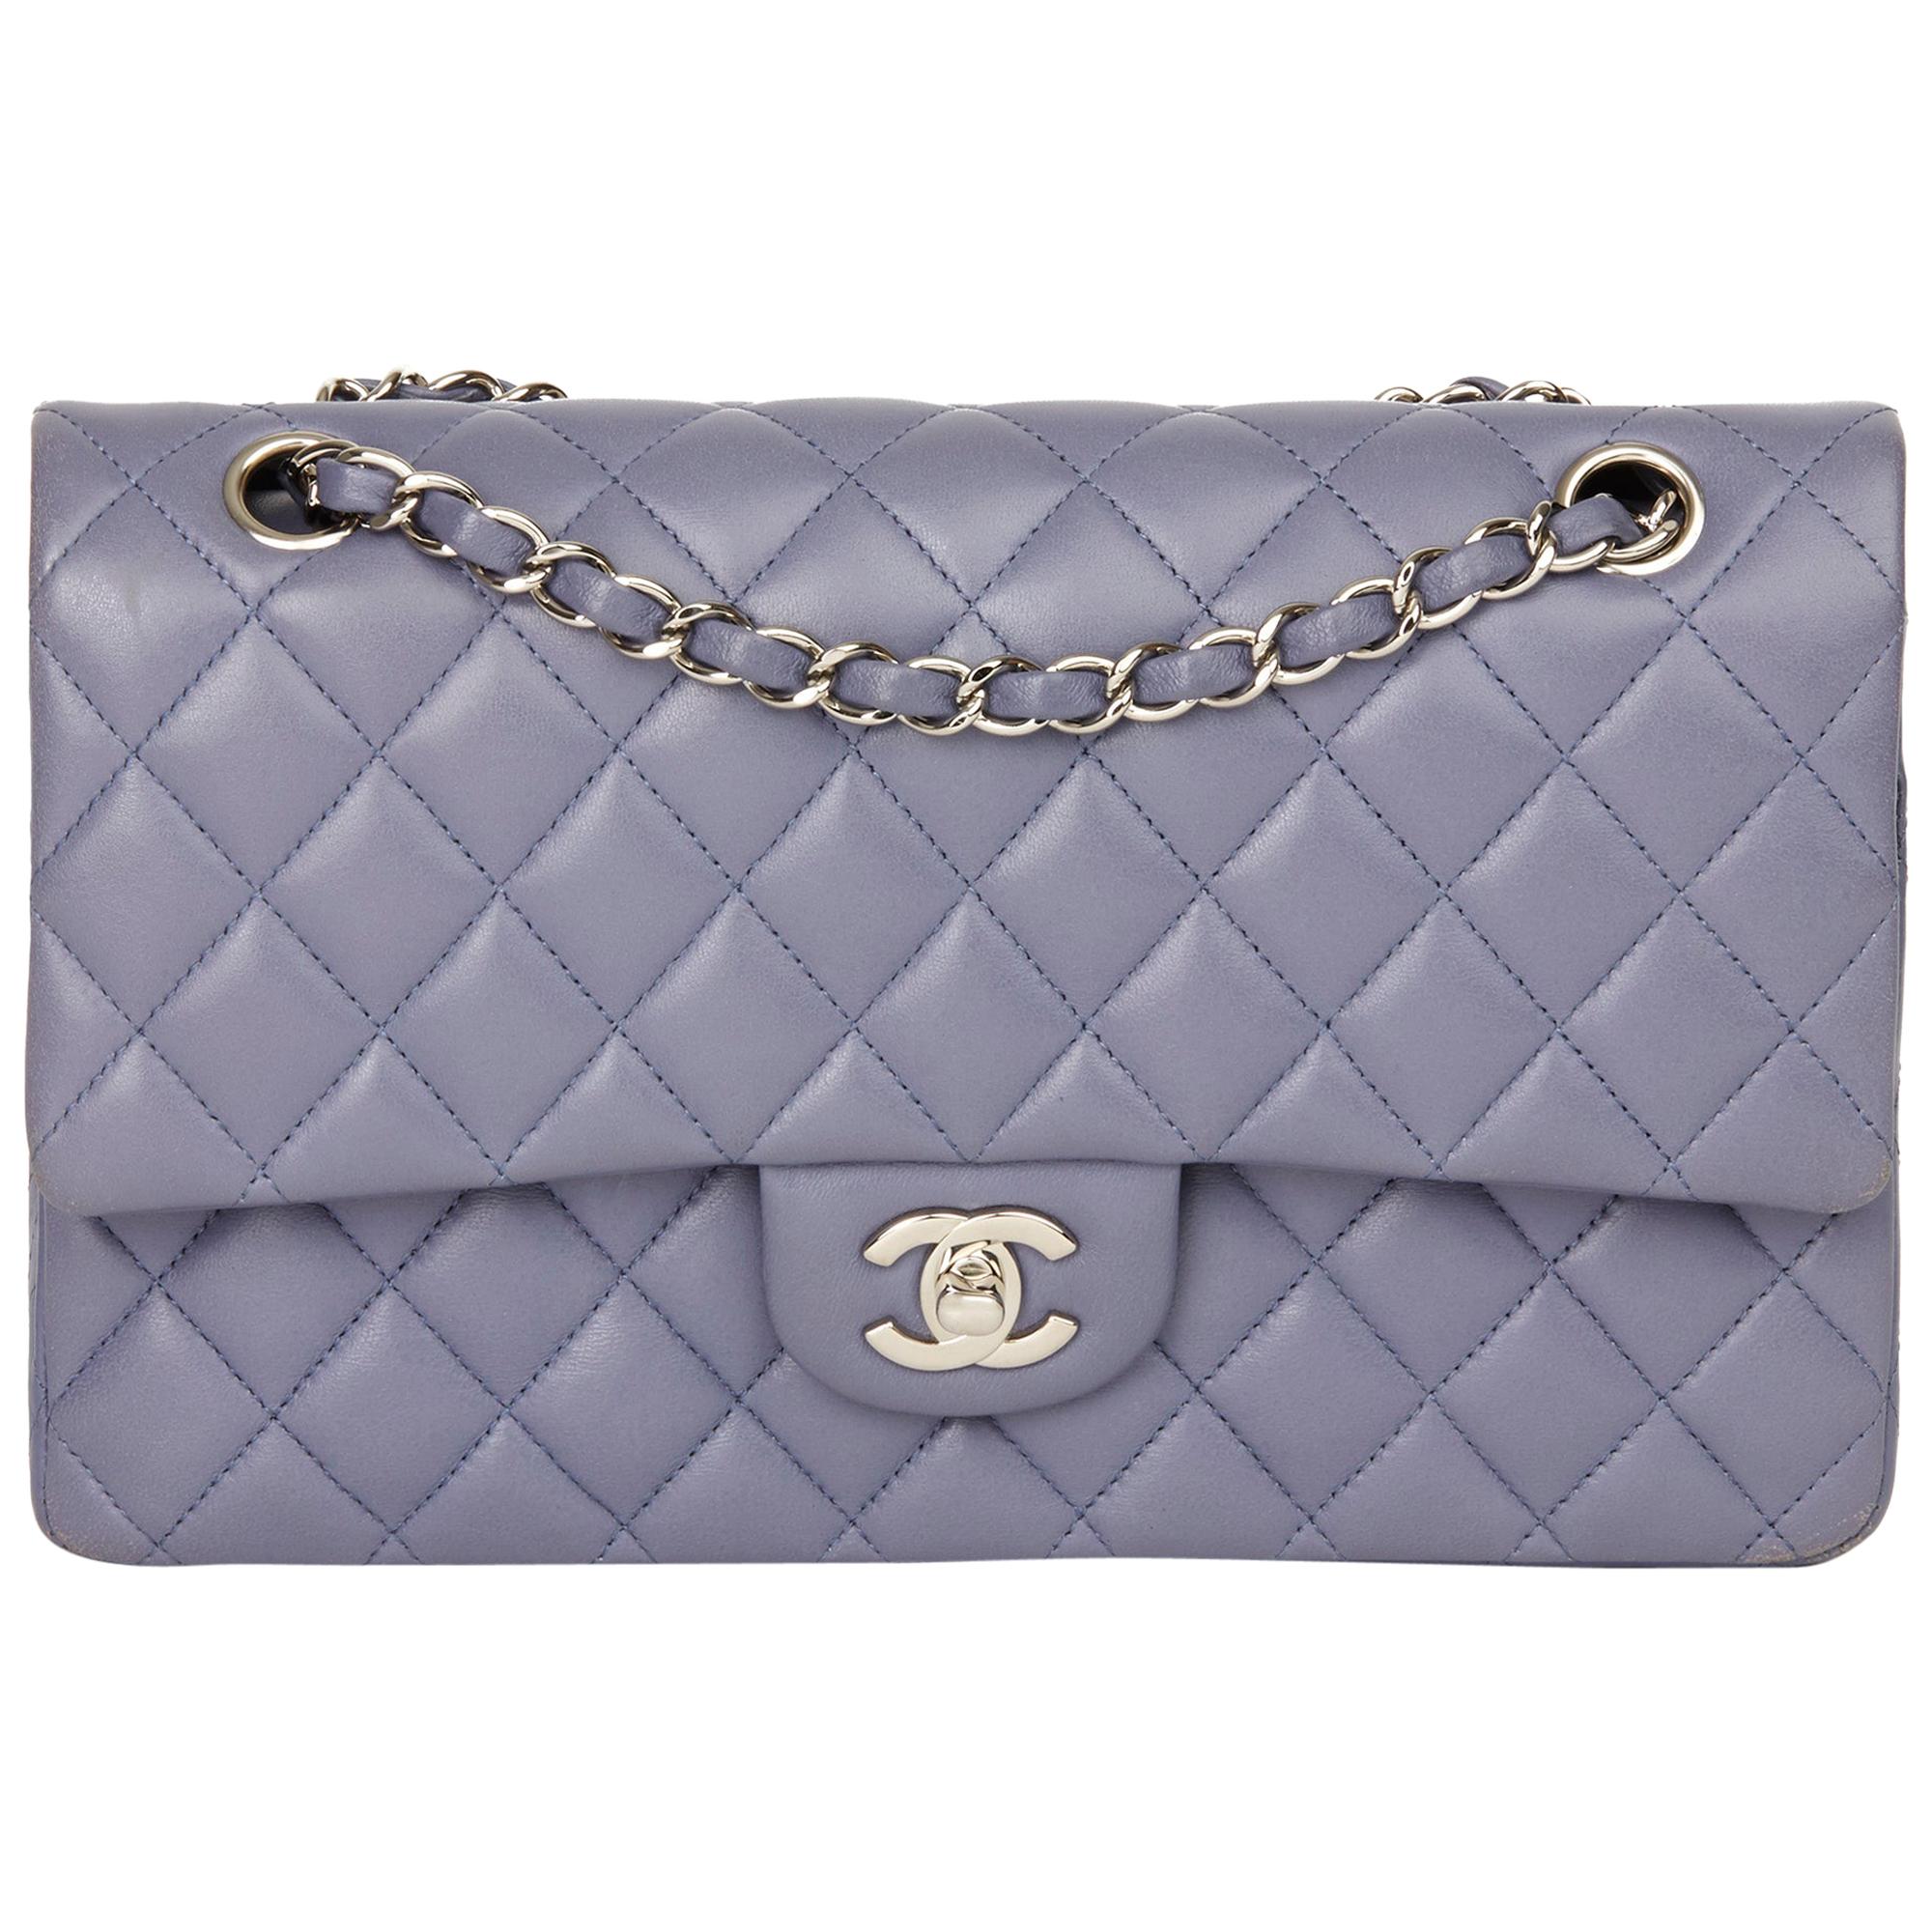 2011 Chanel Lilac Quilted Lambskin Medium Classic Double Flap Bag 